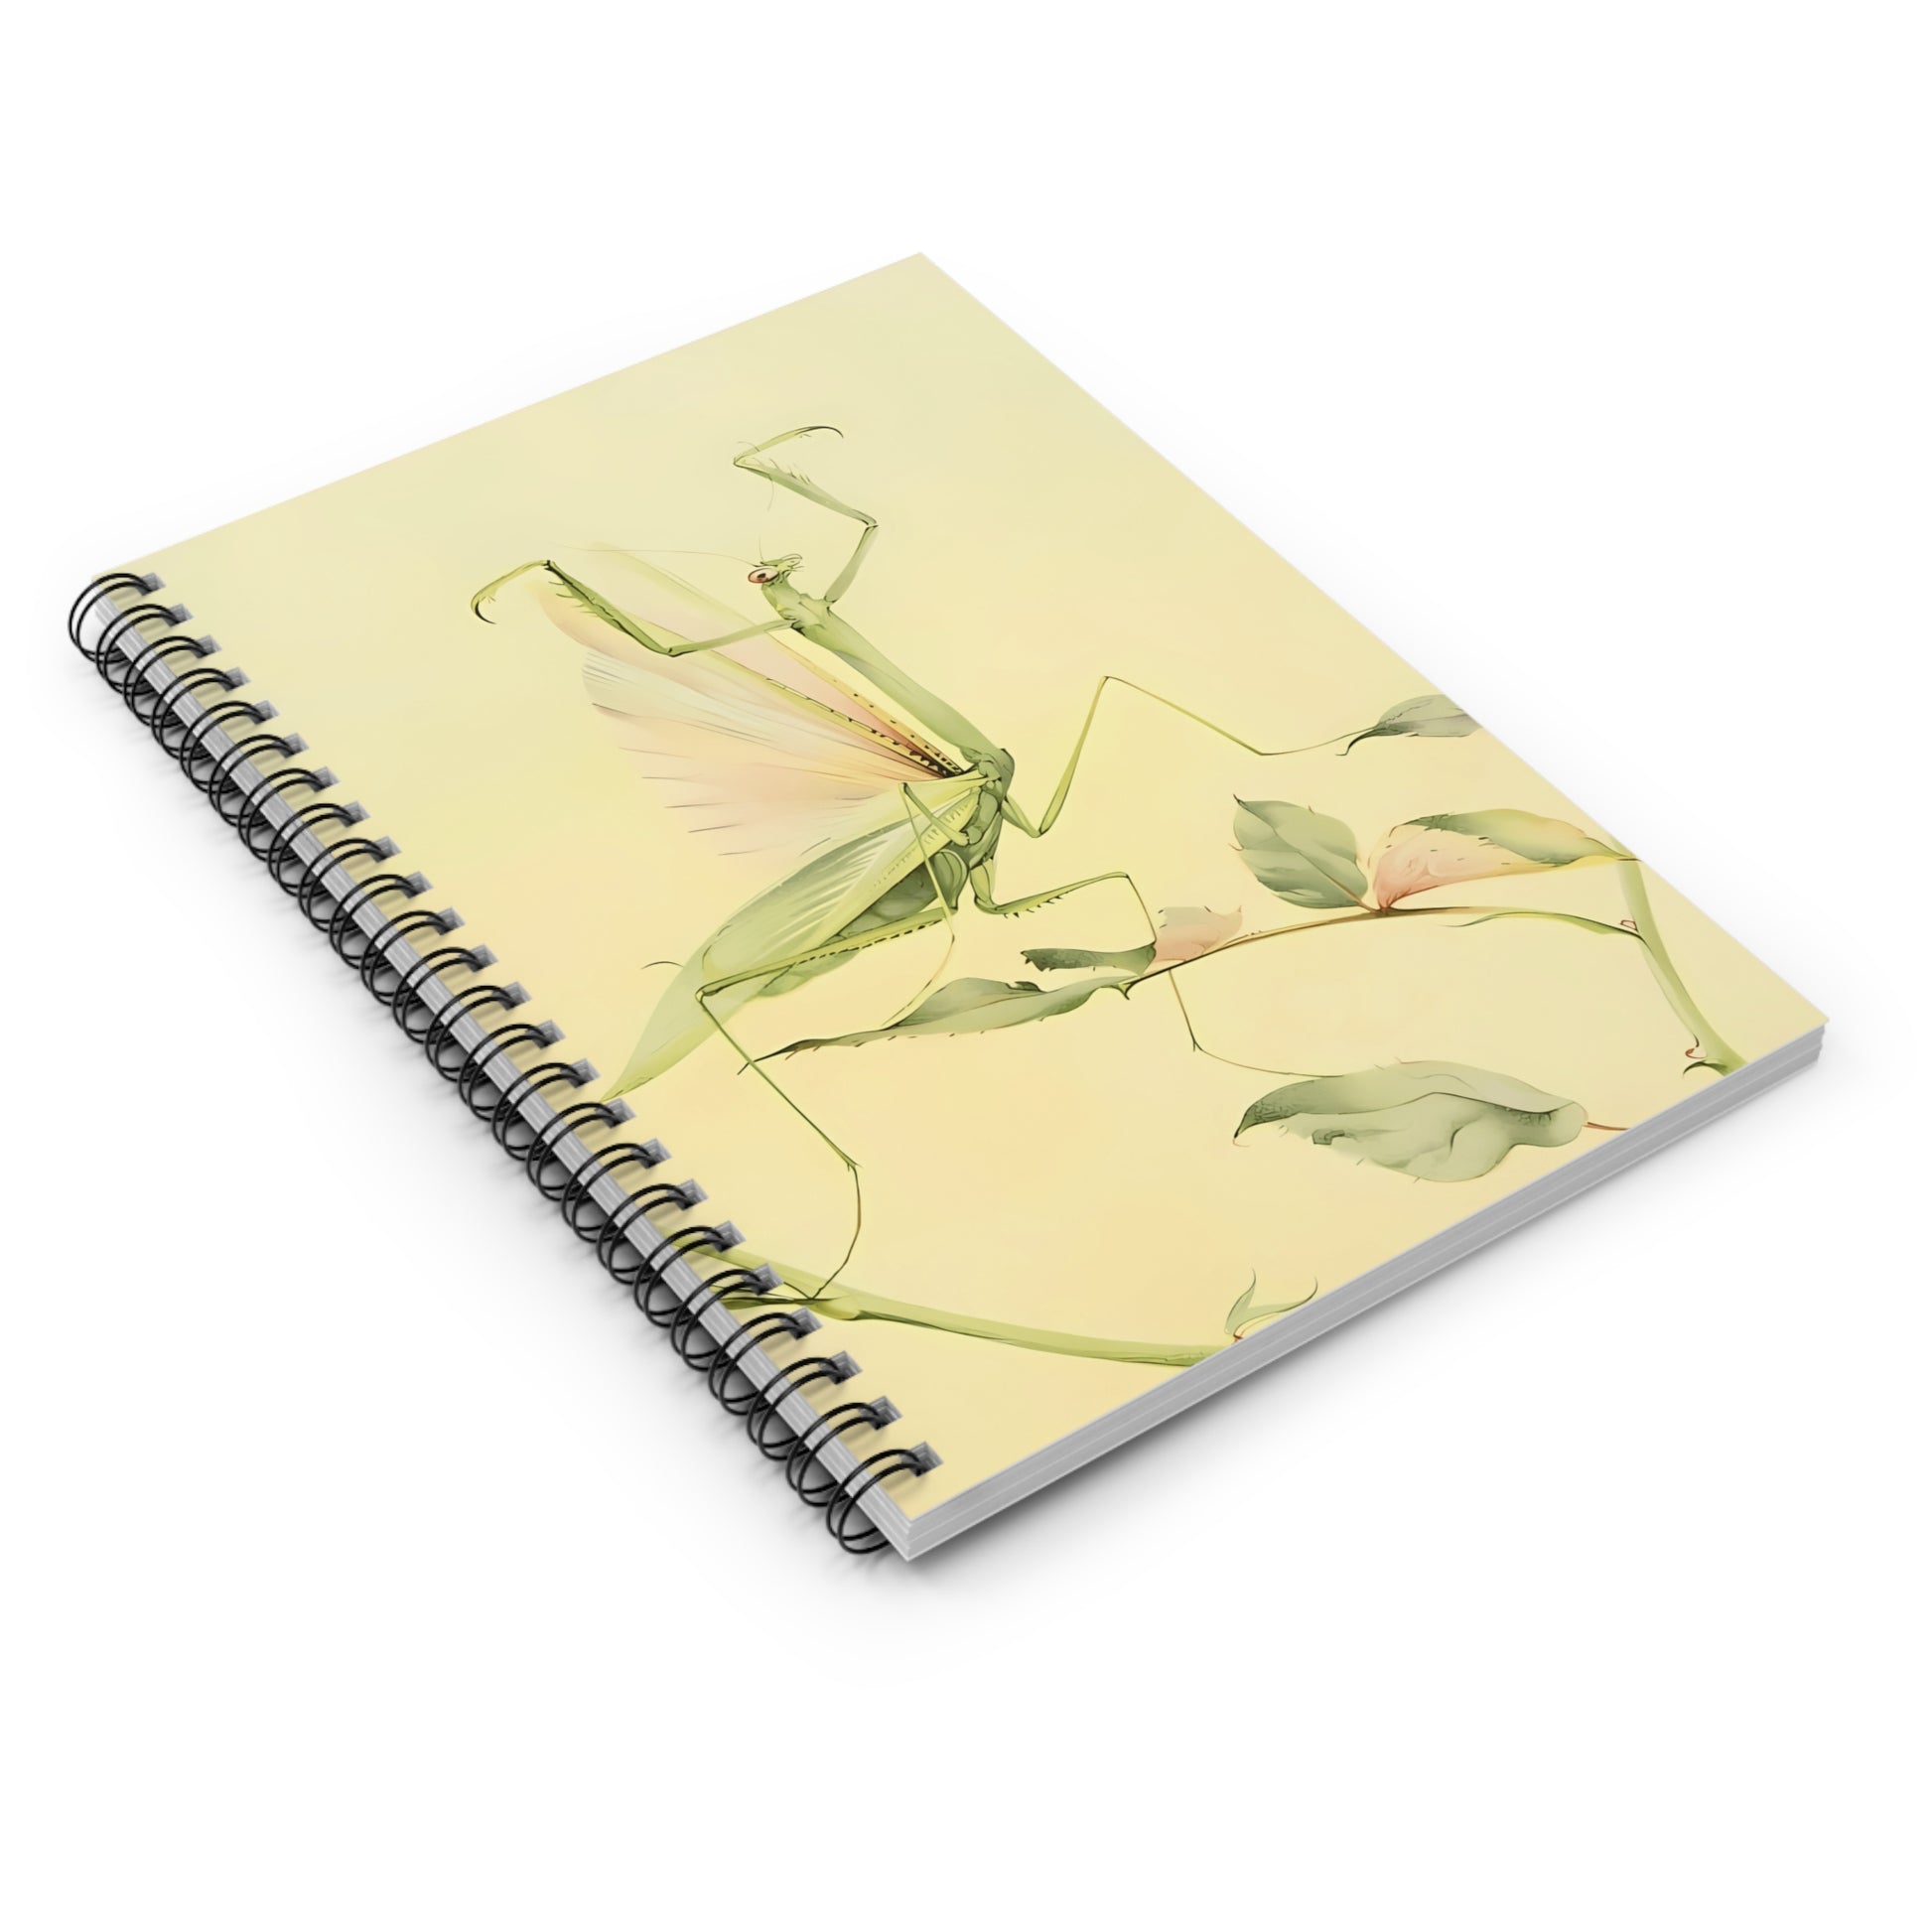 Spiral notebook with vintage illustration of a praying mantis by Jean-Henri Fabre